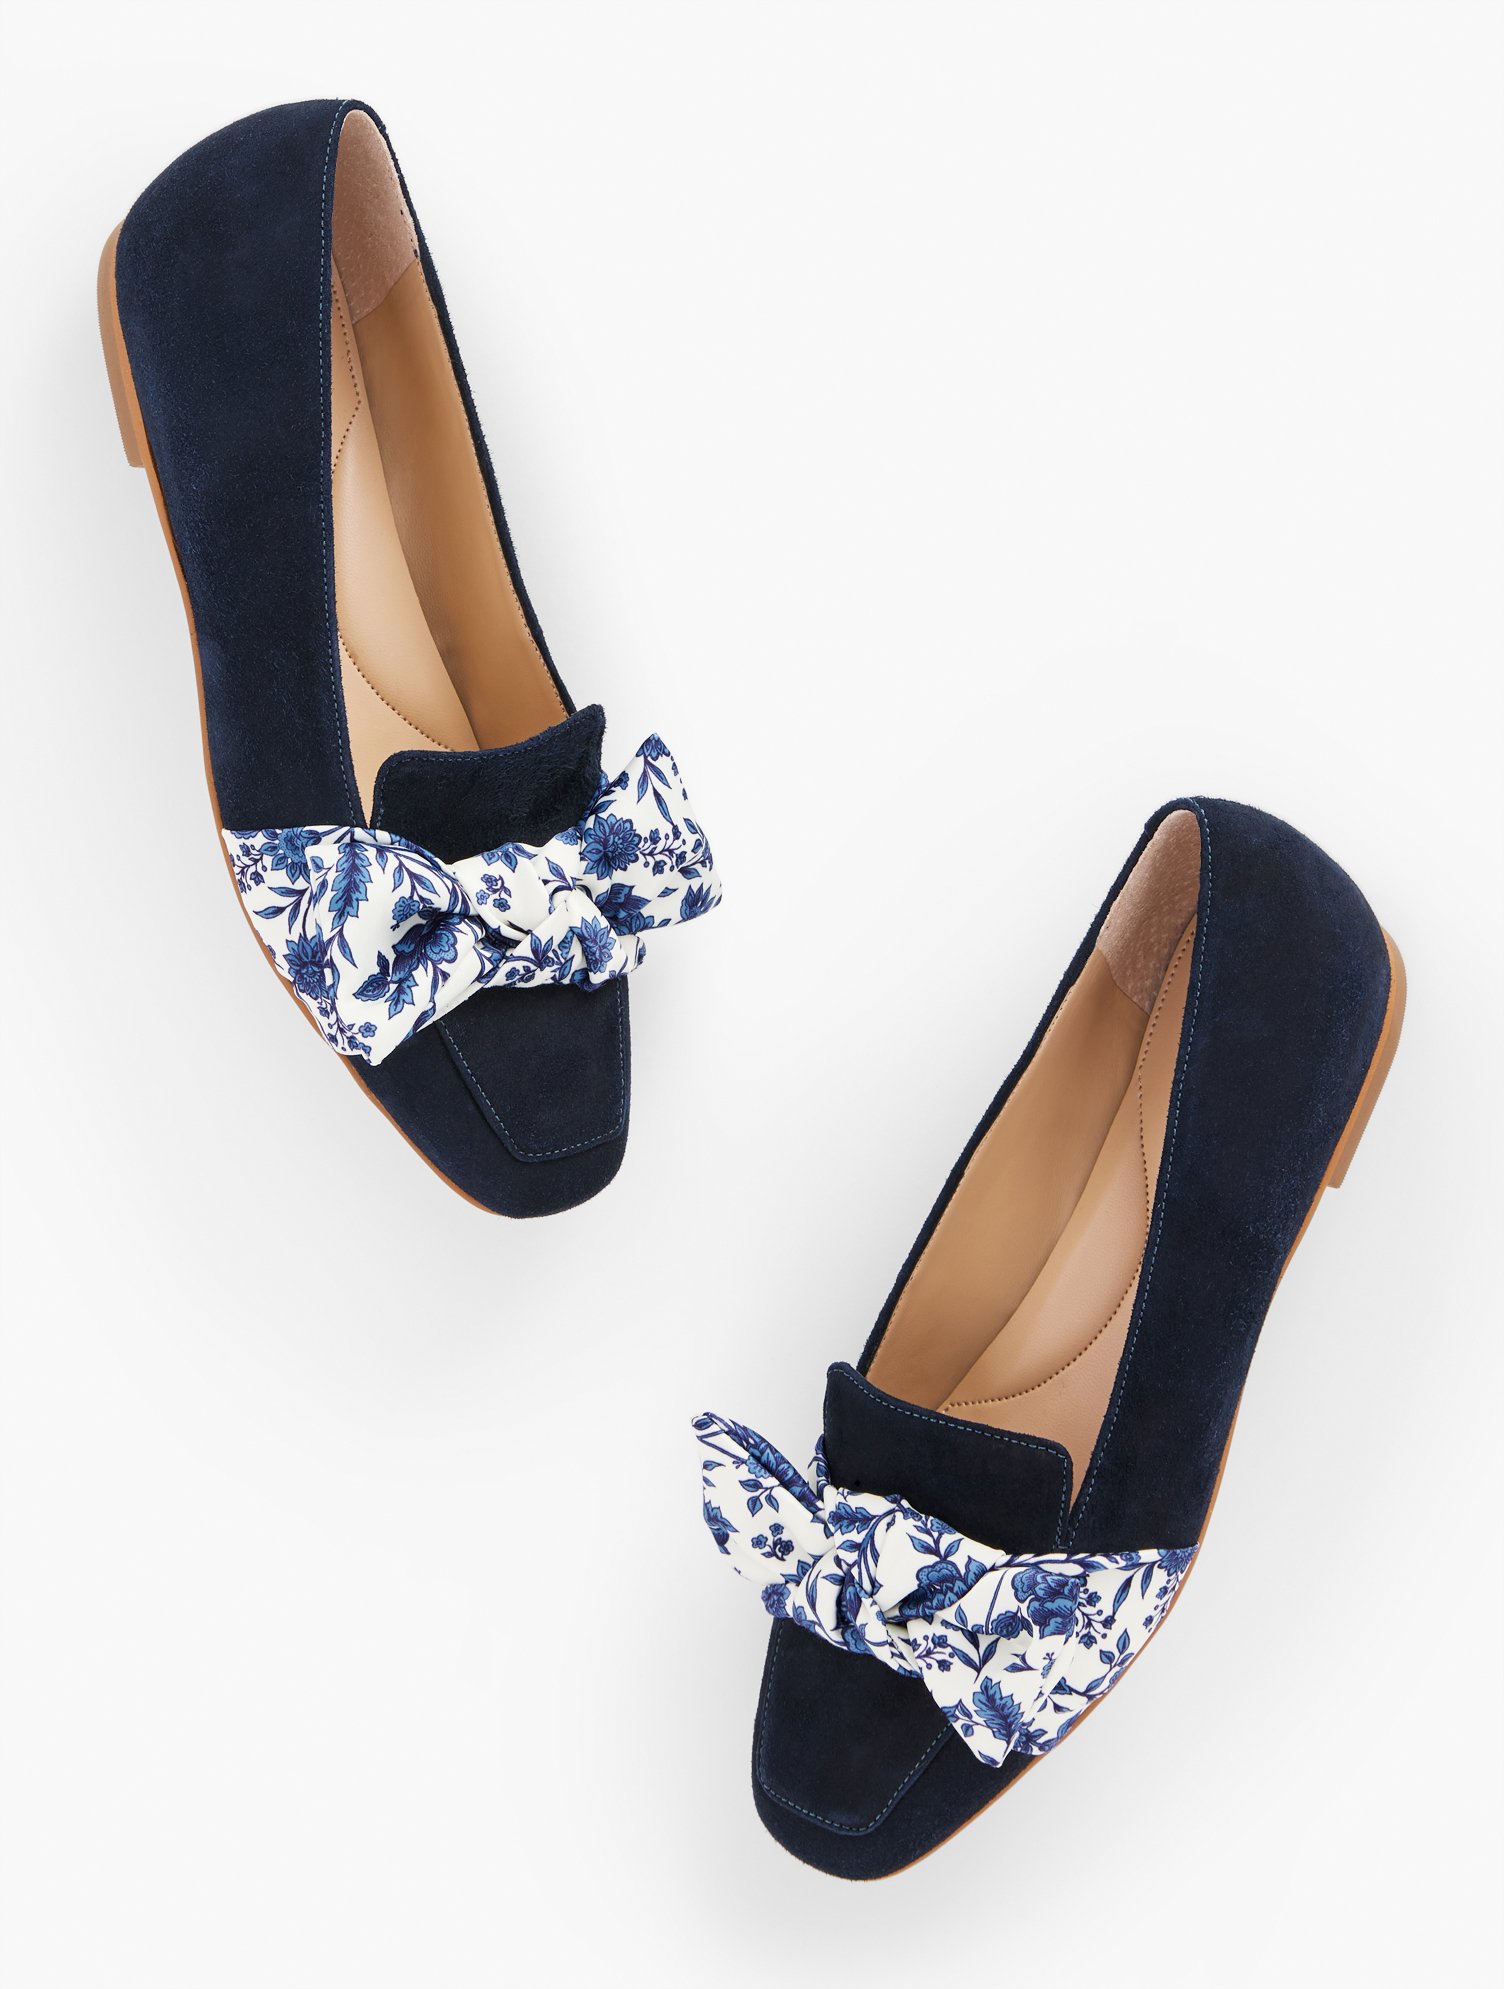 Talbots Stella Floral Bow Suede Loafers - Blue - 10m